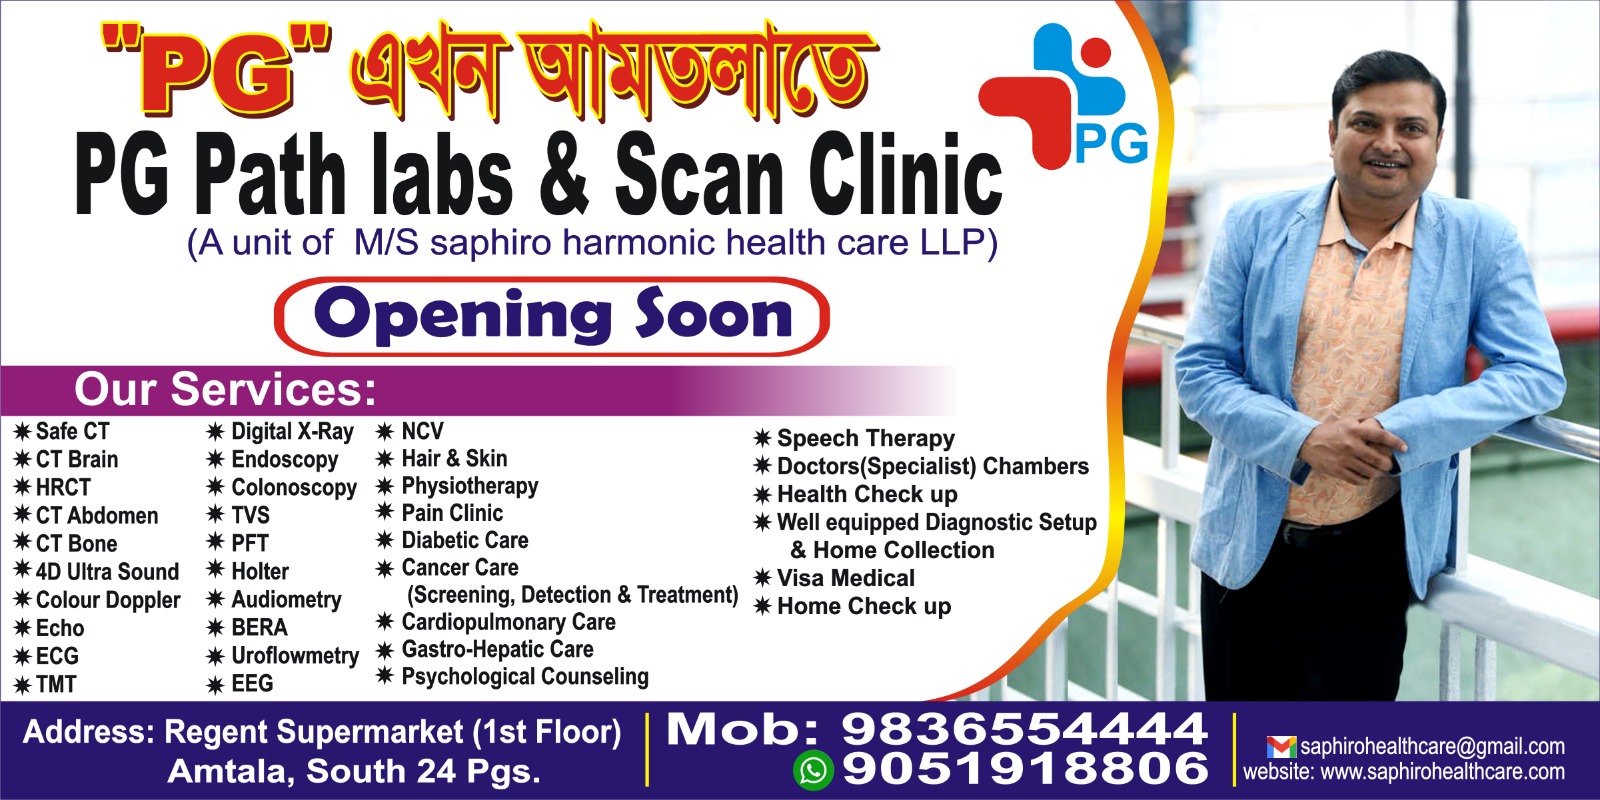 pg path labs & scan clinic